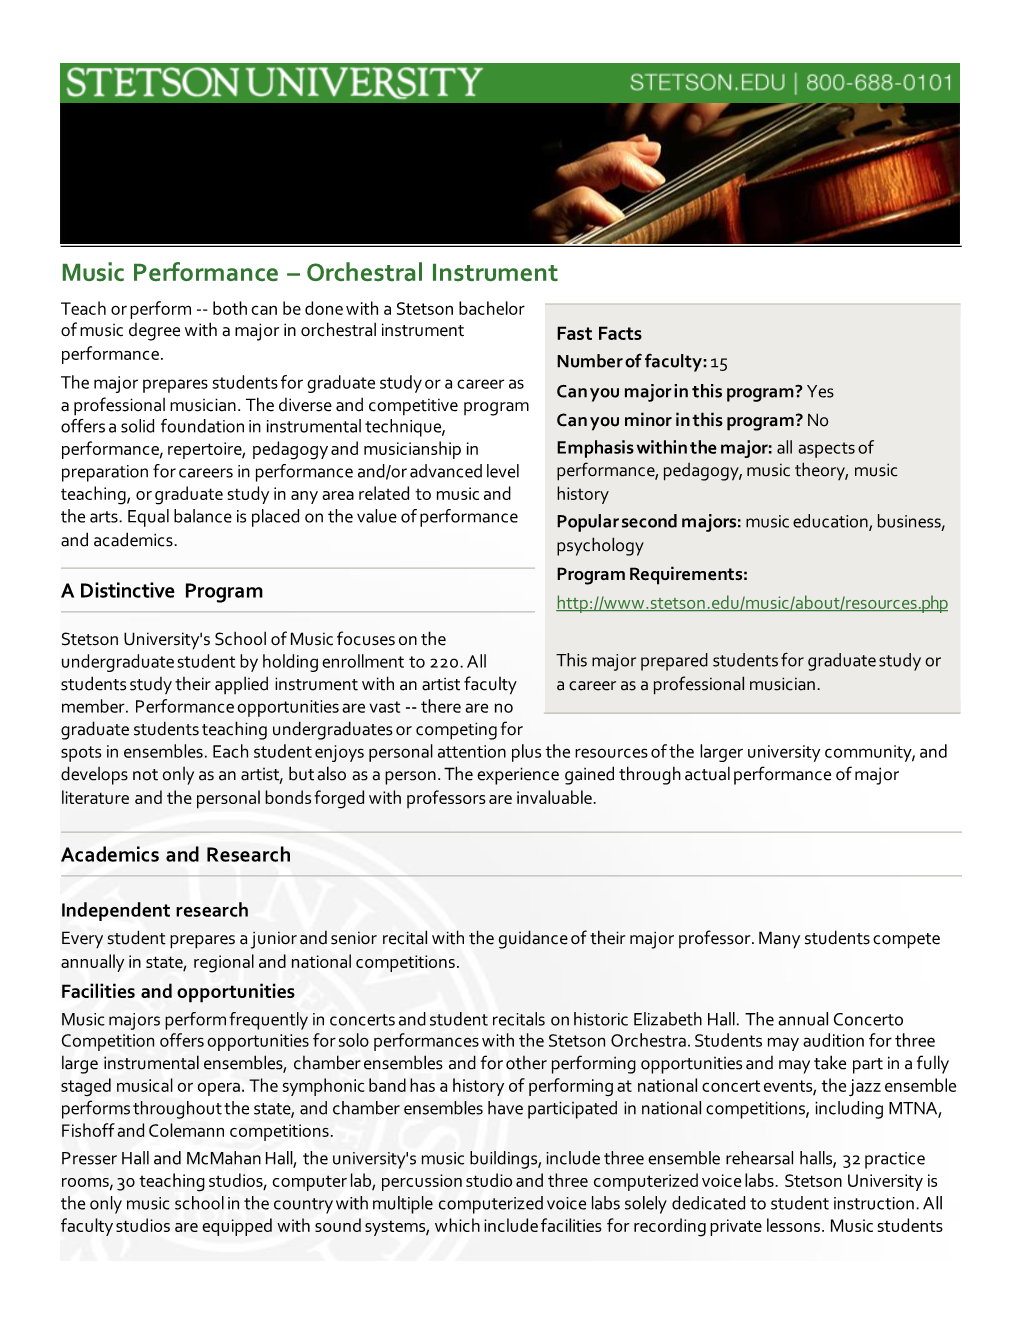 Orchestral Instrument Teach Or Perform -- Both Can Be Done with a Stetson Bachelor of Music Degree with a Major in Orchestral Instrument Fast Facts Performance